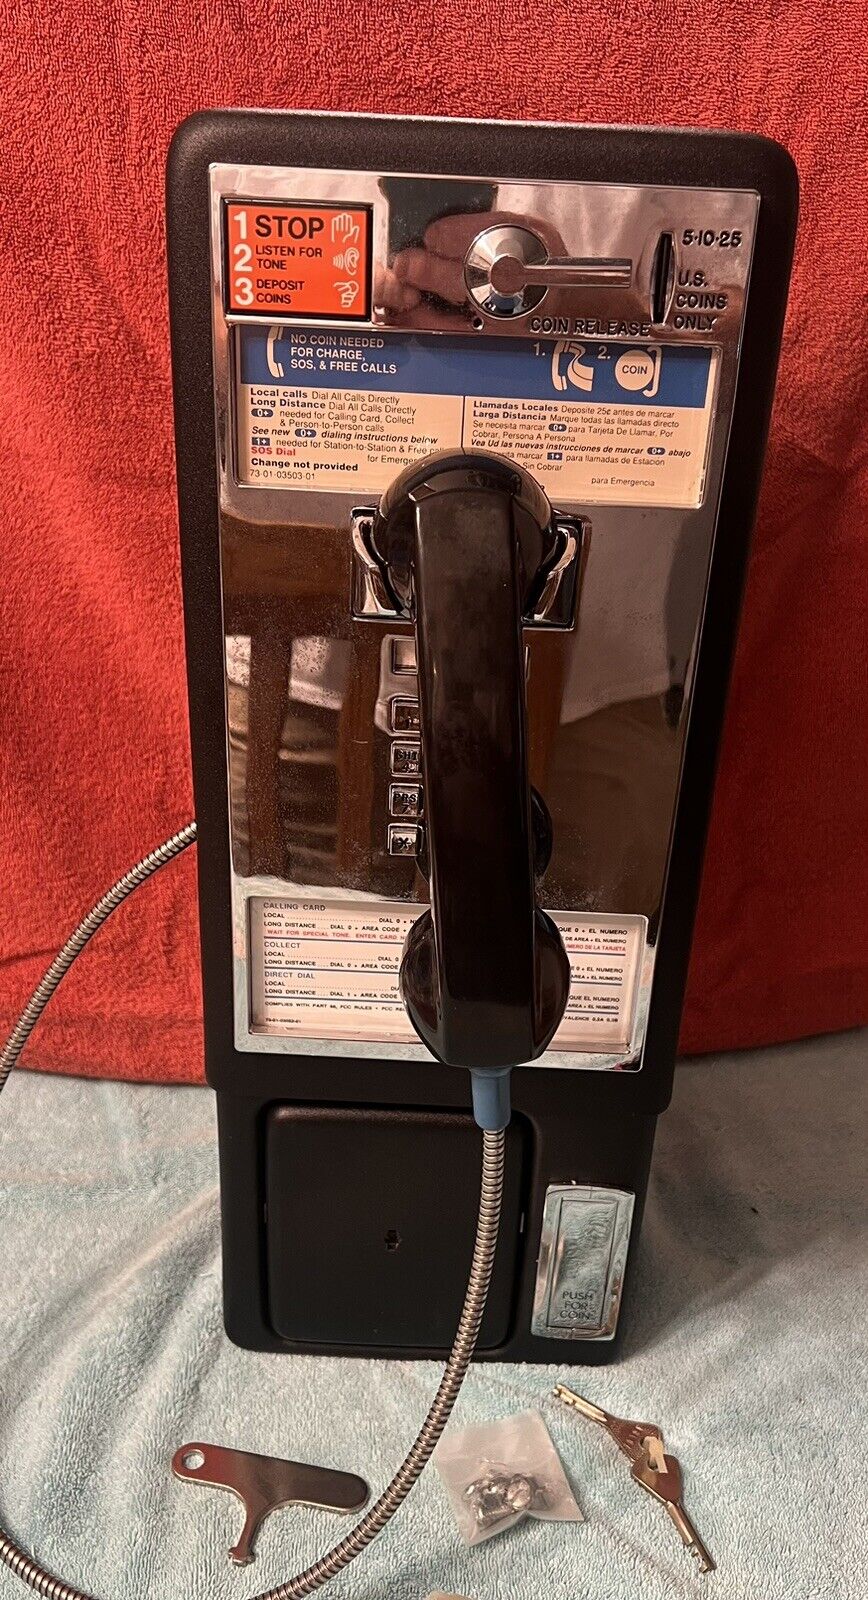 NiB Vintage Never Used Pay phone Complete With Stand, Mount, Shroud & KEYS